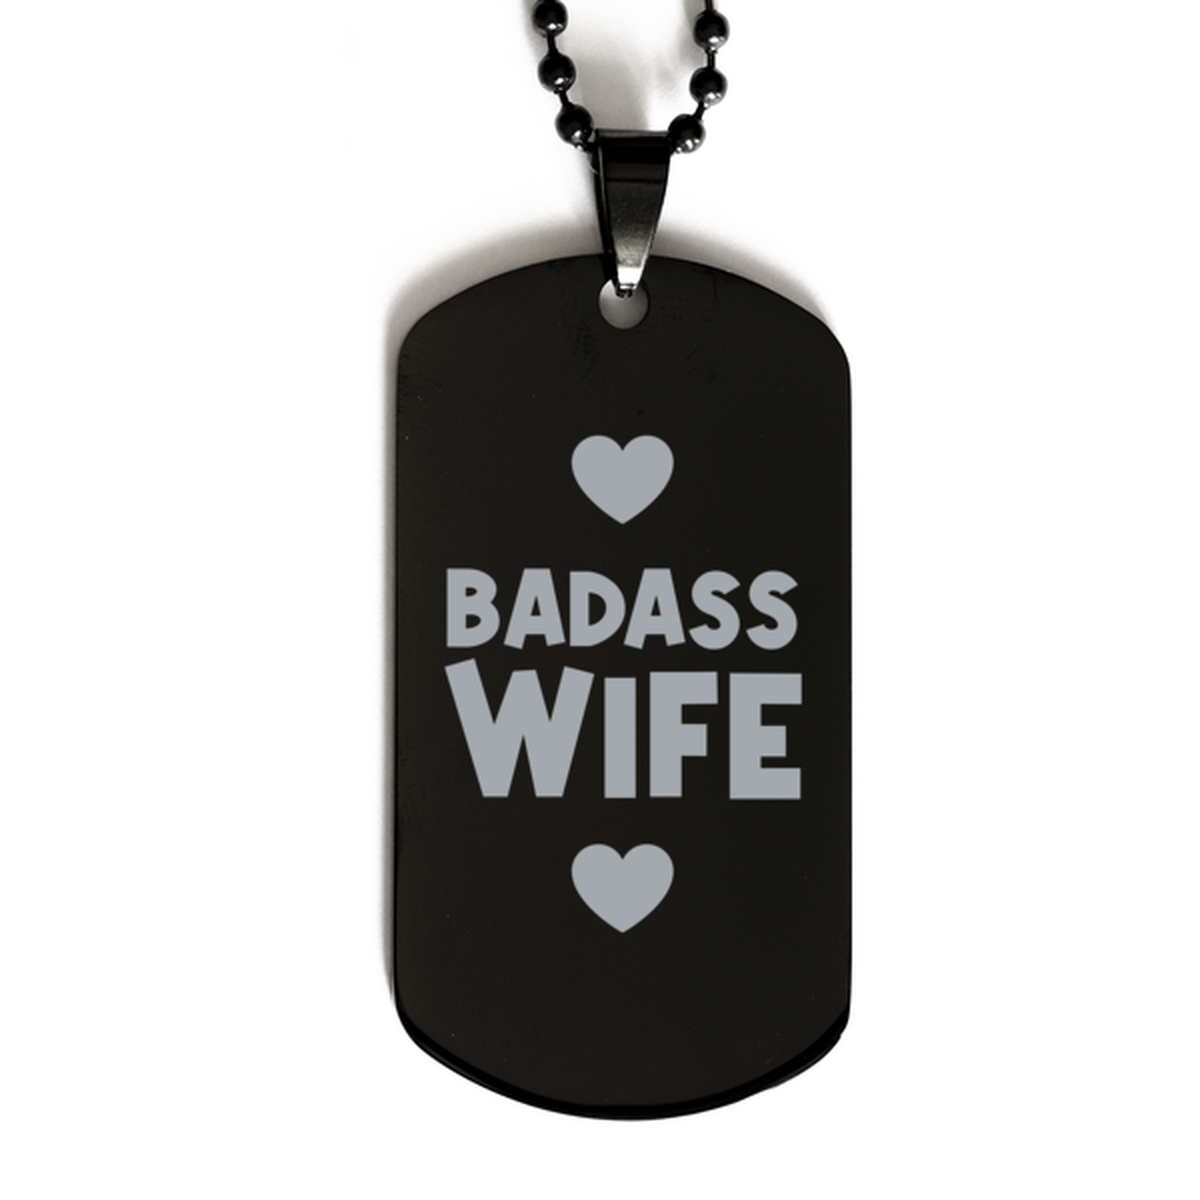 Wife Black Dog Tag, Badass Wife, Funny Family Gifts  Necklace For Wife From Husband